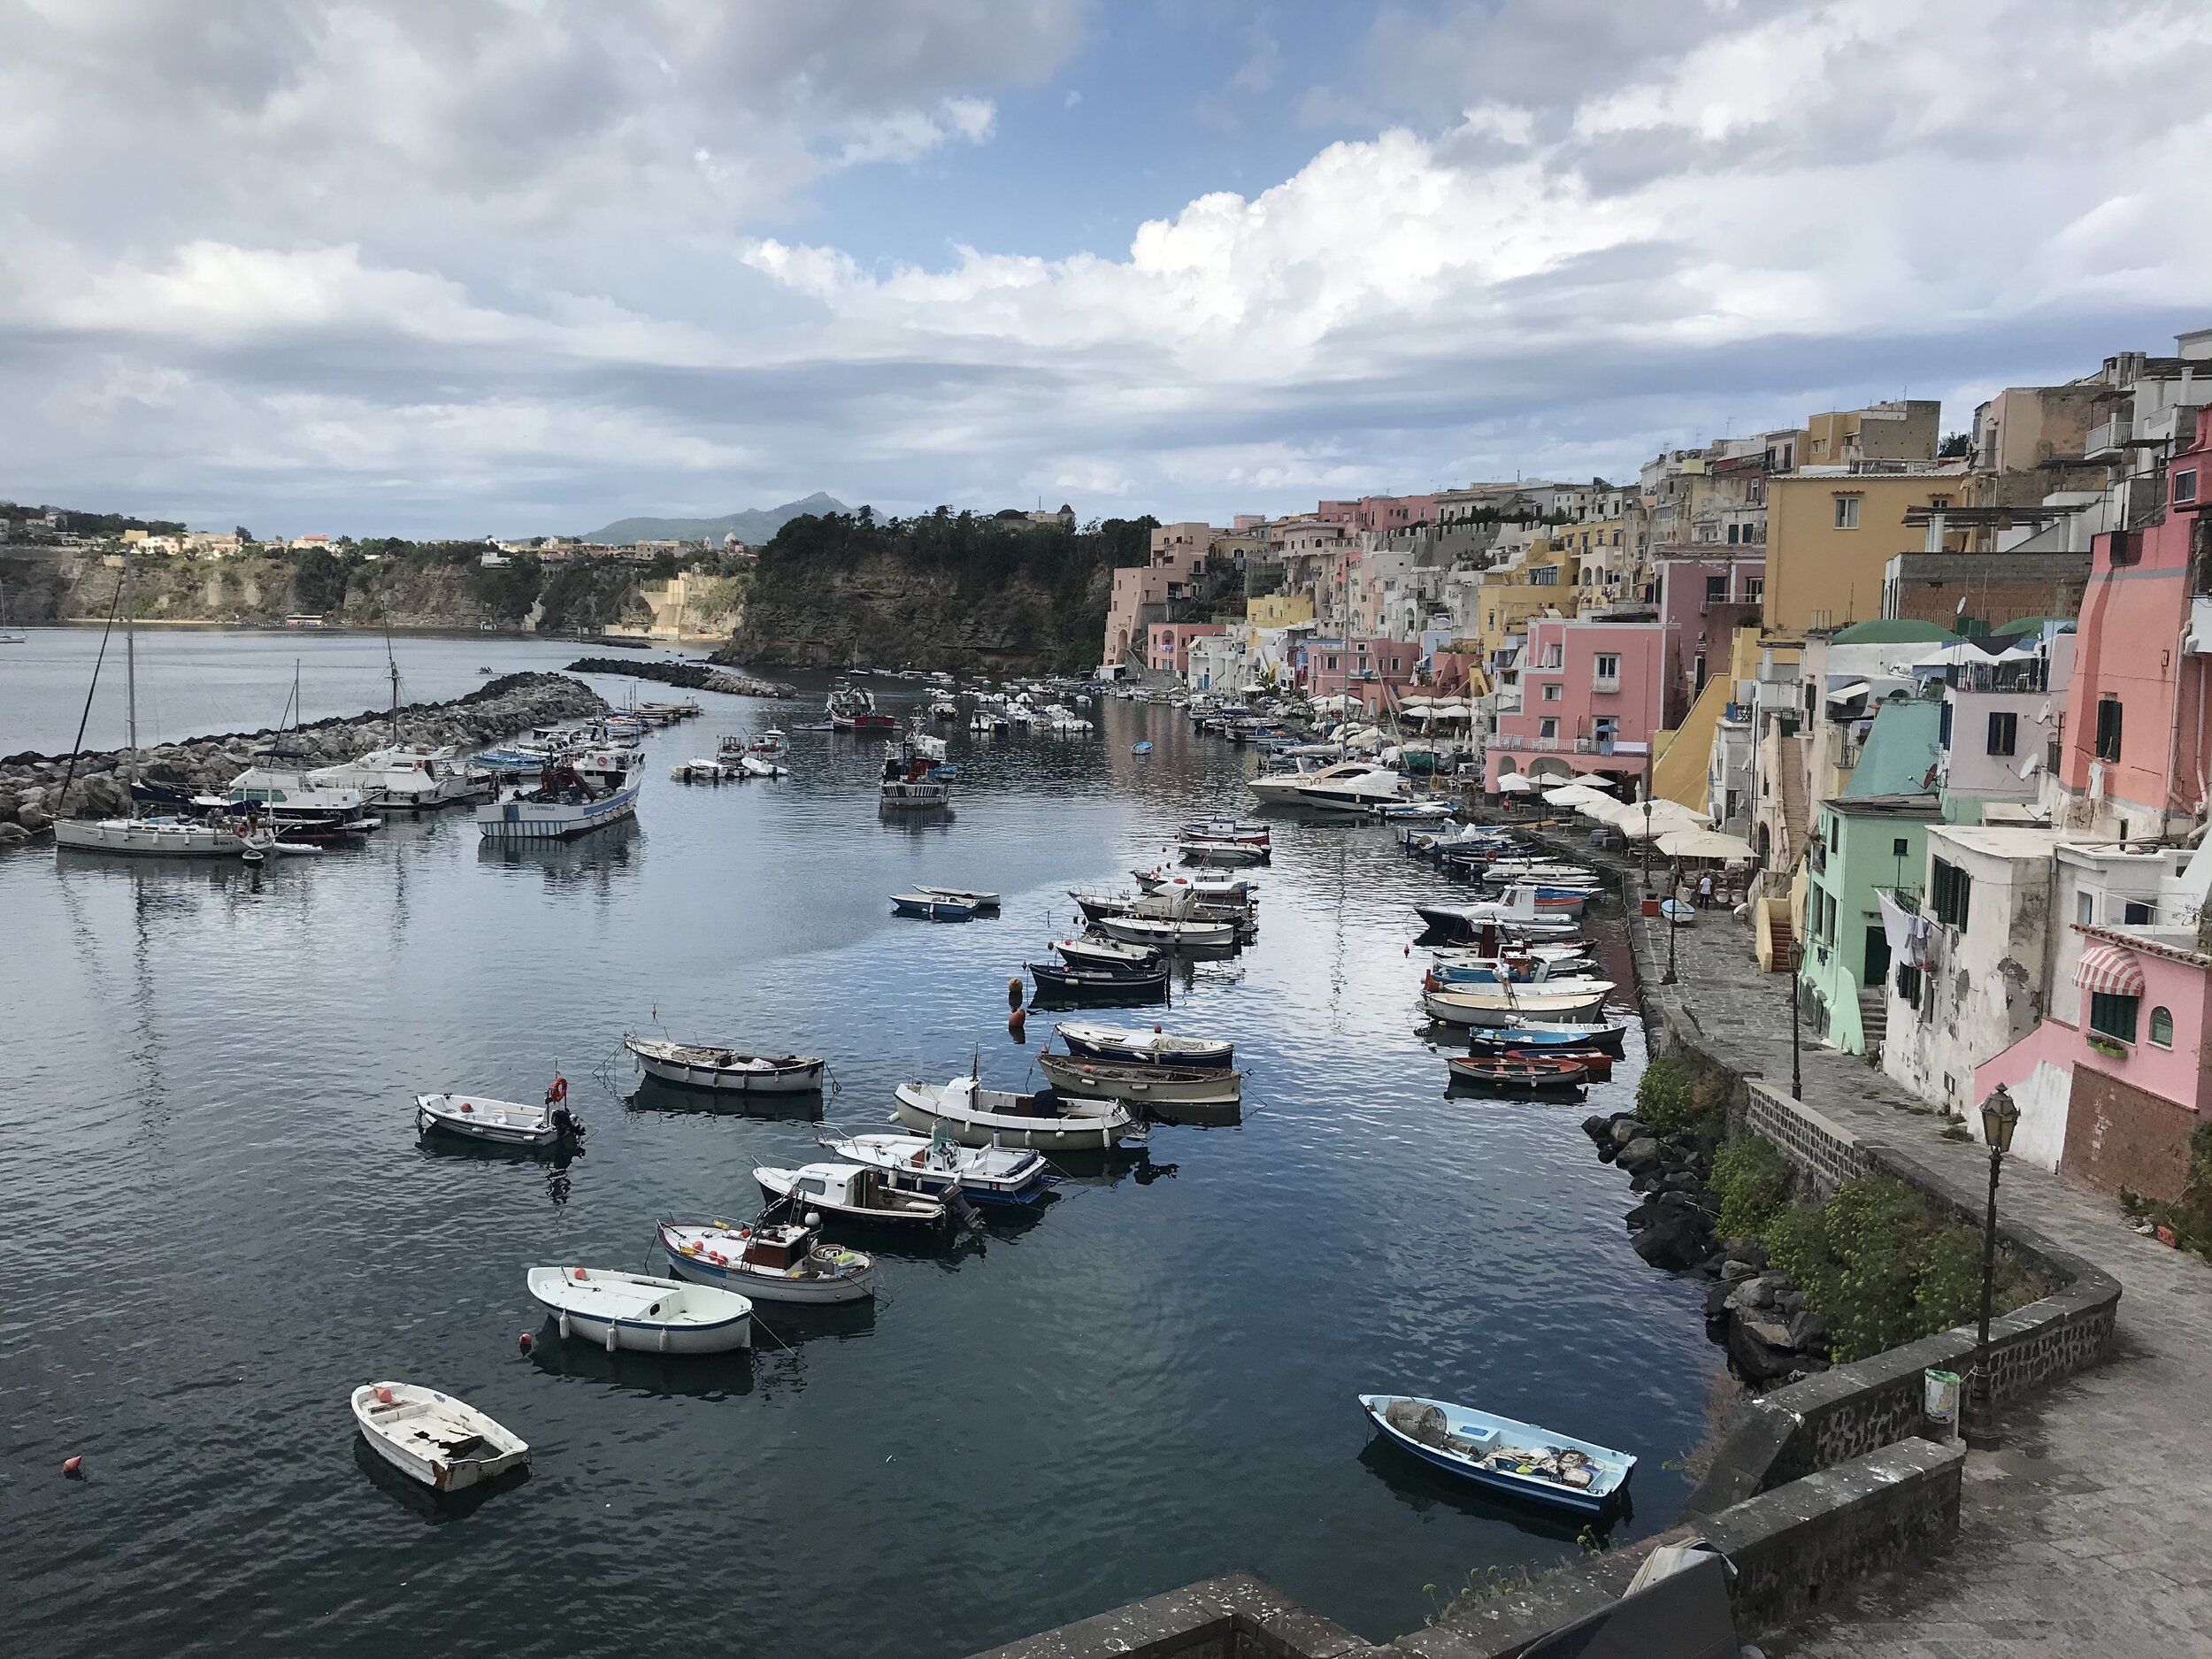  PROCIDA, Napoli. August 5th, 2020. PICTURED: The other side of Procida from where the ferries arrive, a thousand painted houses are bisected by a thousand tiny staircases. 